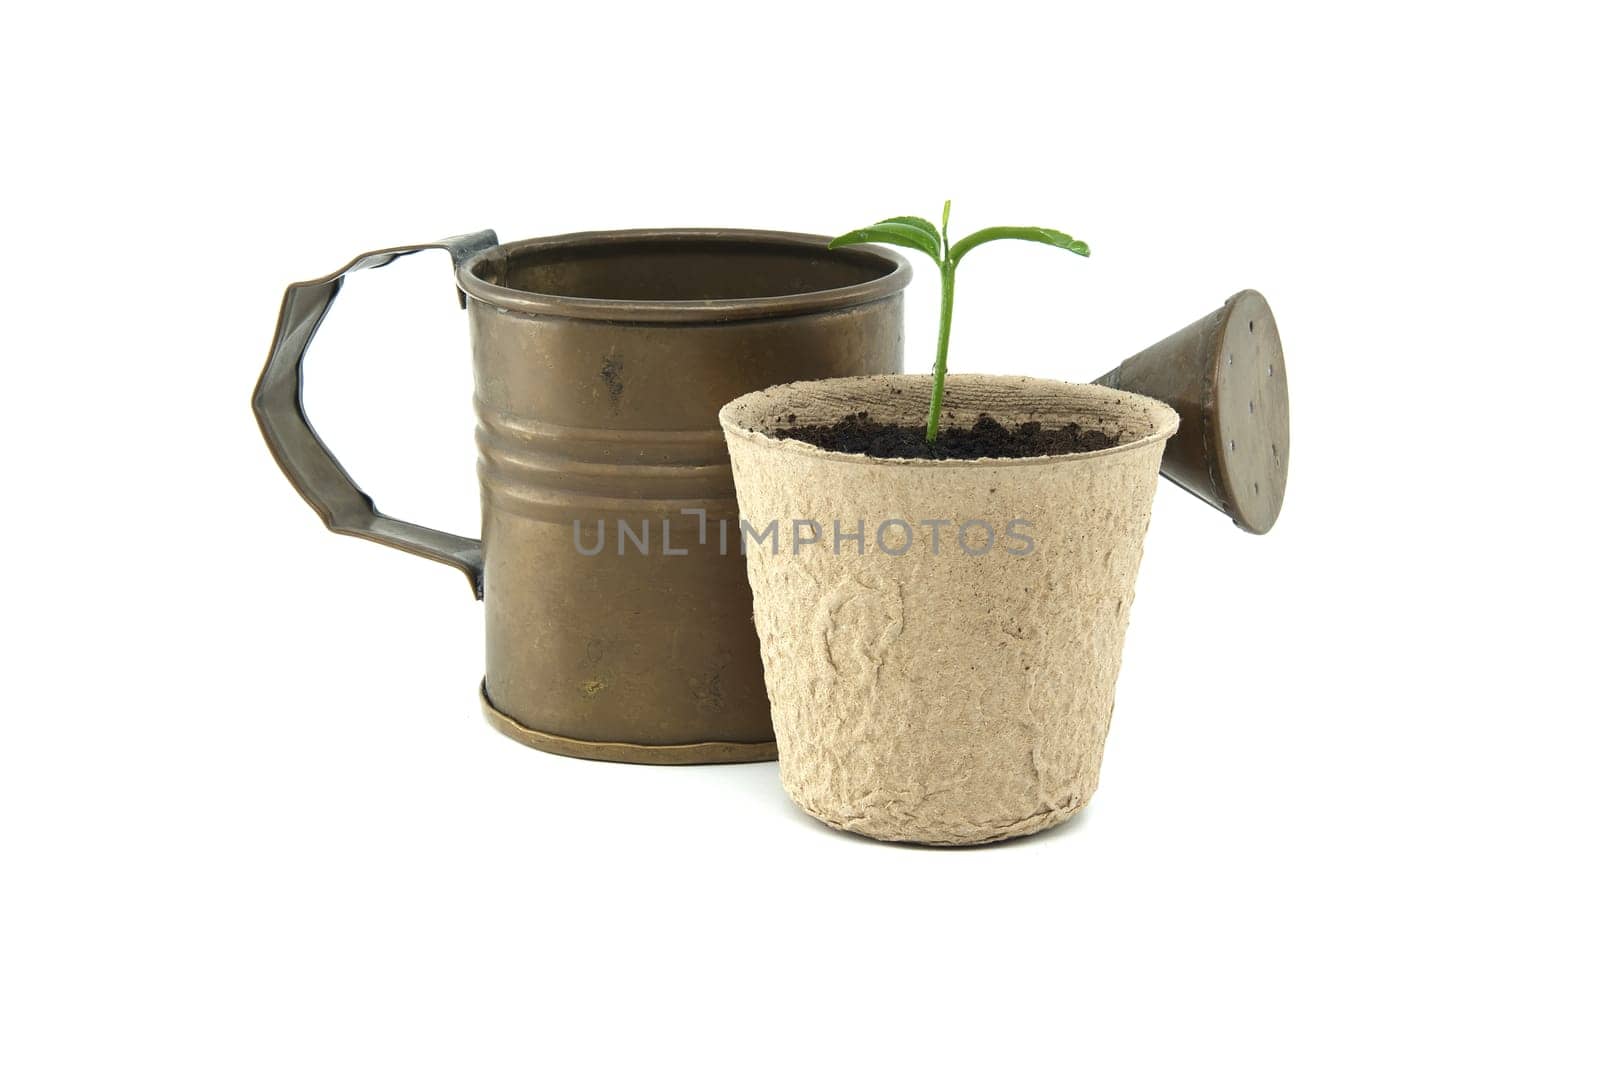 Seedling potted in biodegradable pot near vintage watering can by NetPix